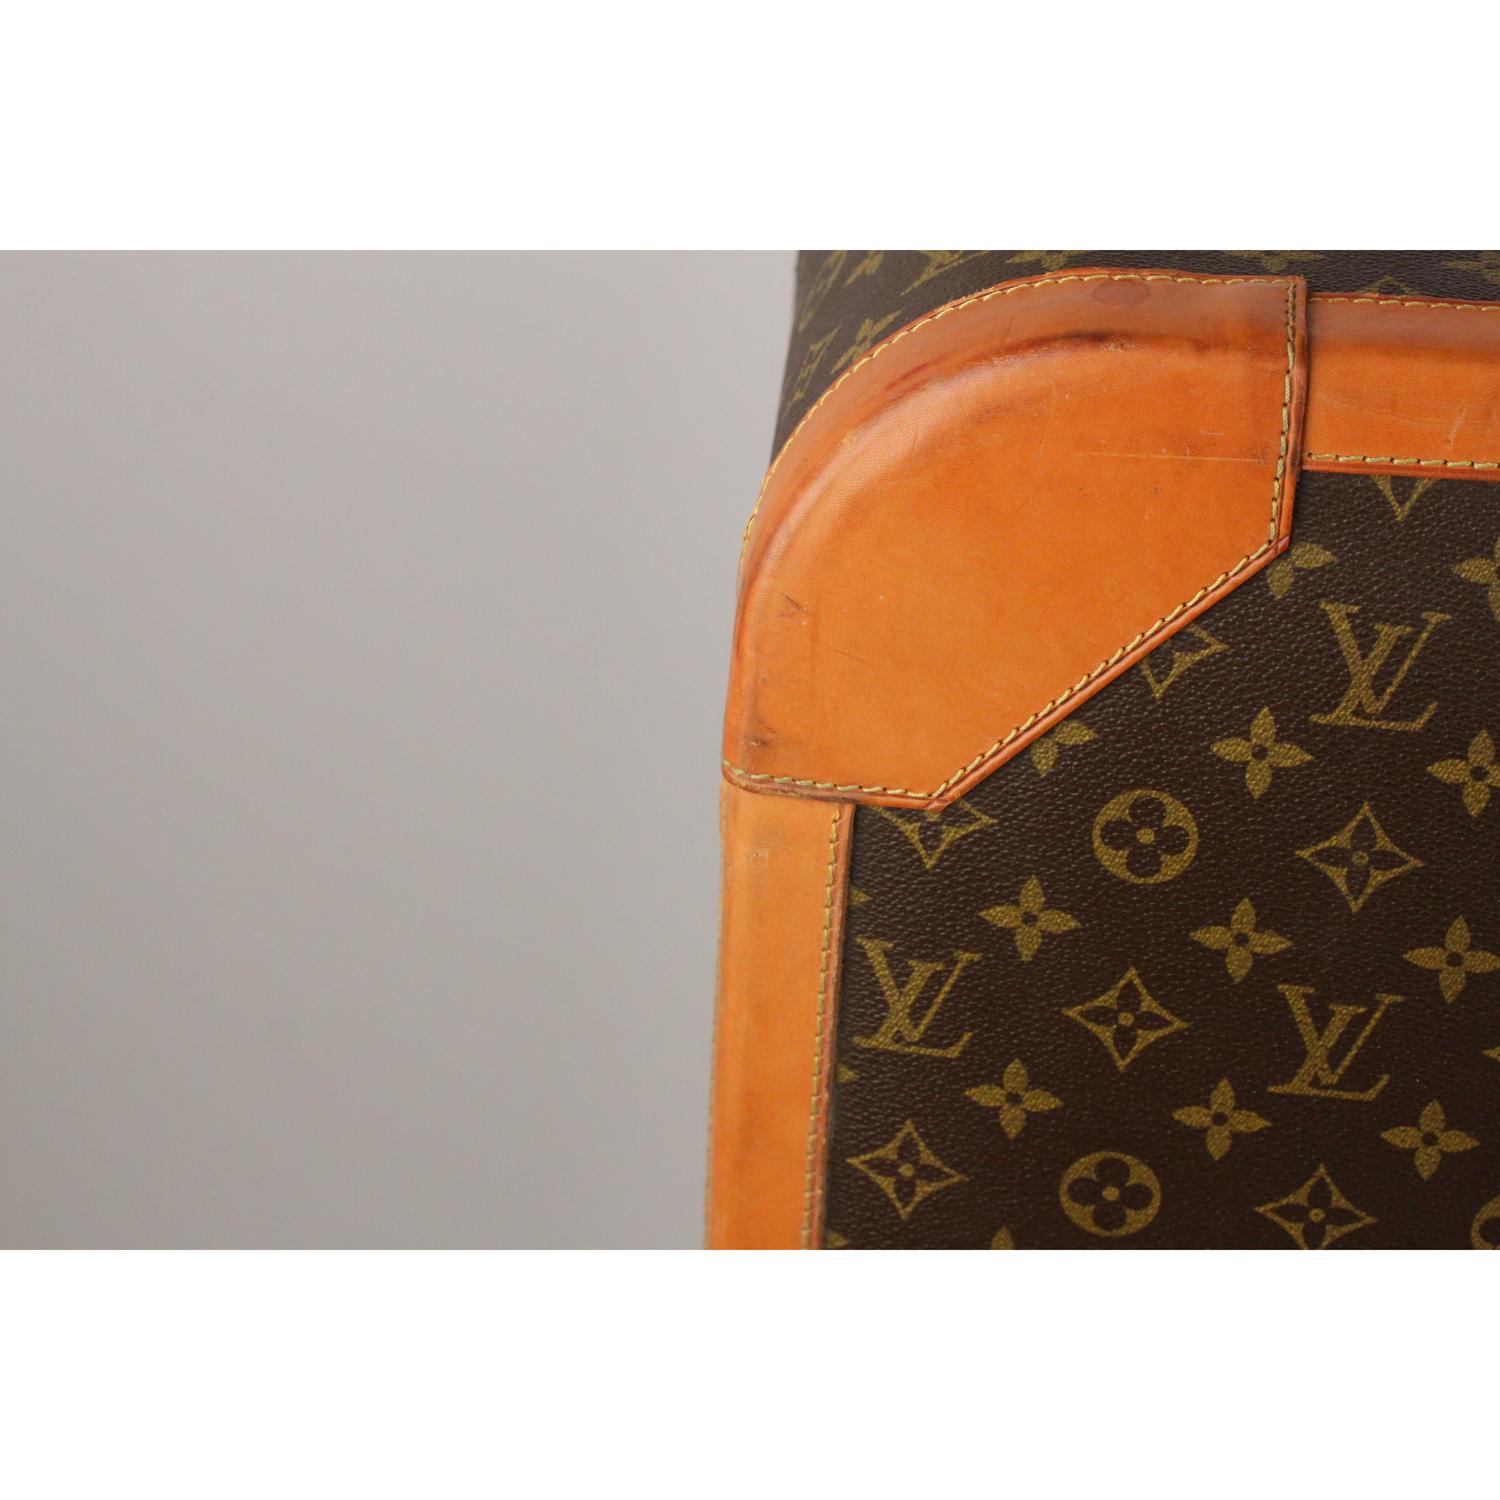 - LOUIS VUITTON vintage Monogram Special Lock 80 Suitcase 
- A part of Louis Vuitton history, ideal for home or office decor 
- Monogram canvas 
- Canvas lining 
- Rounded leather handle with protective cover 
- Canvas interior
- Louis Vuitton